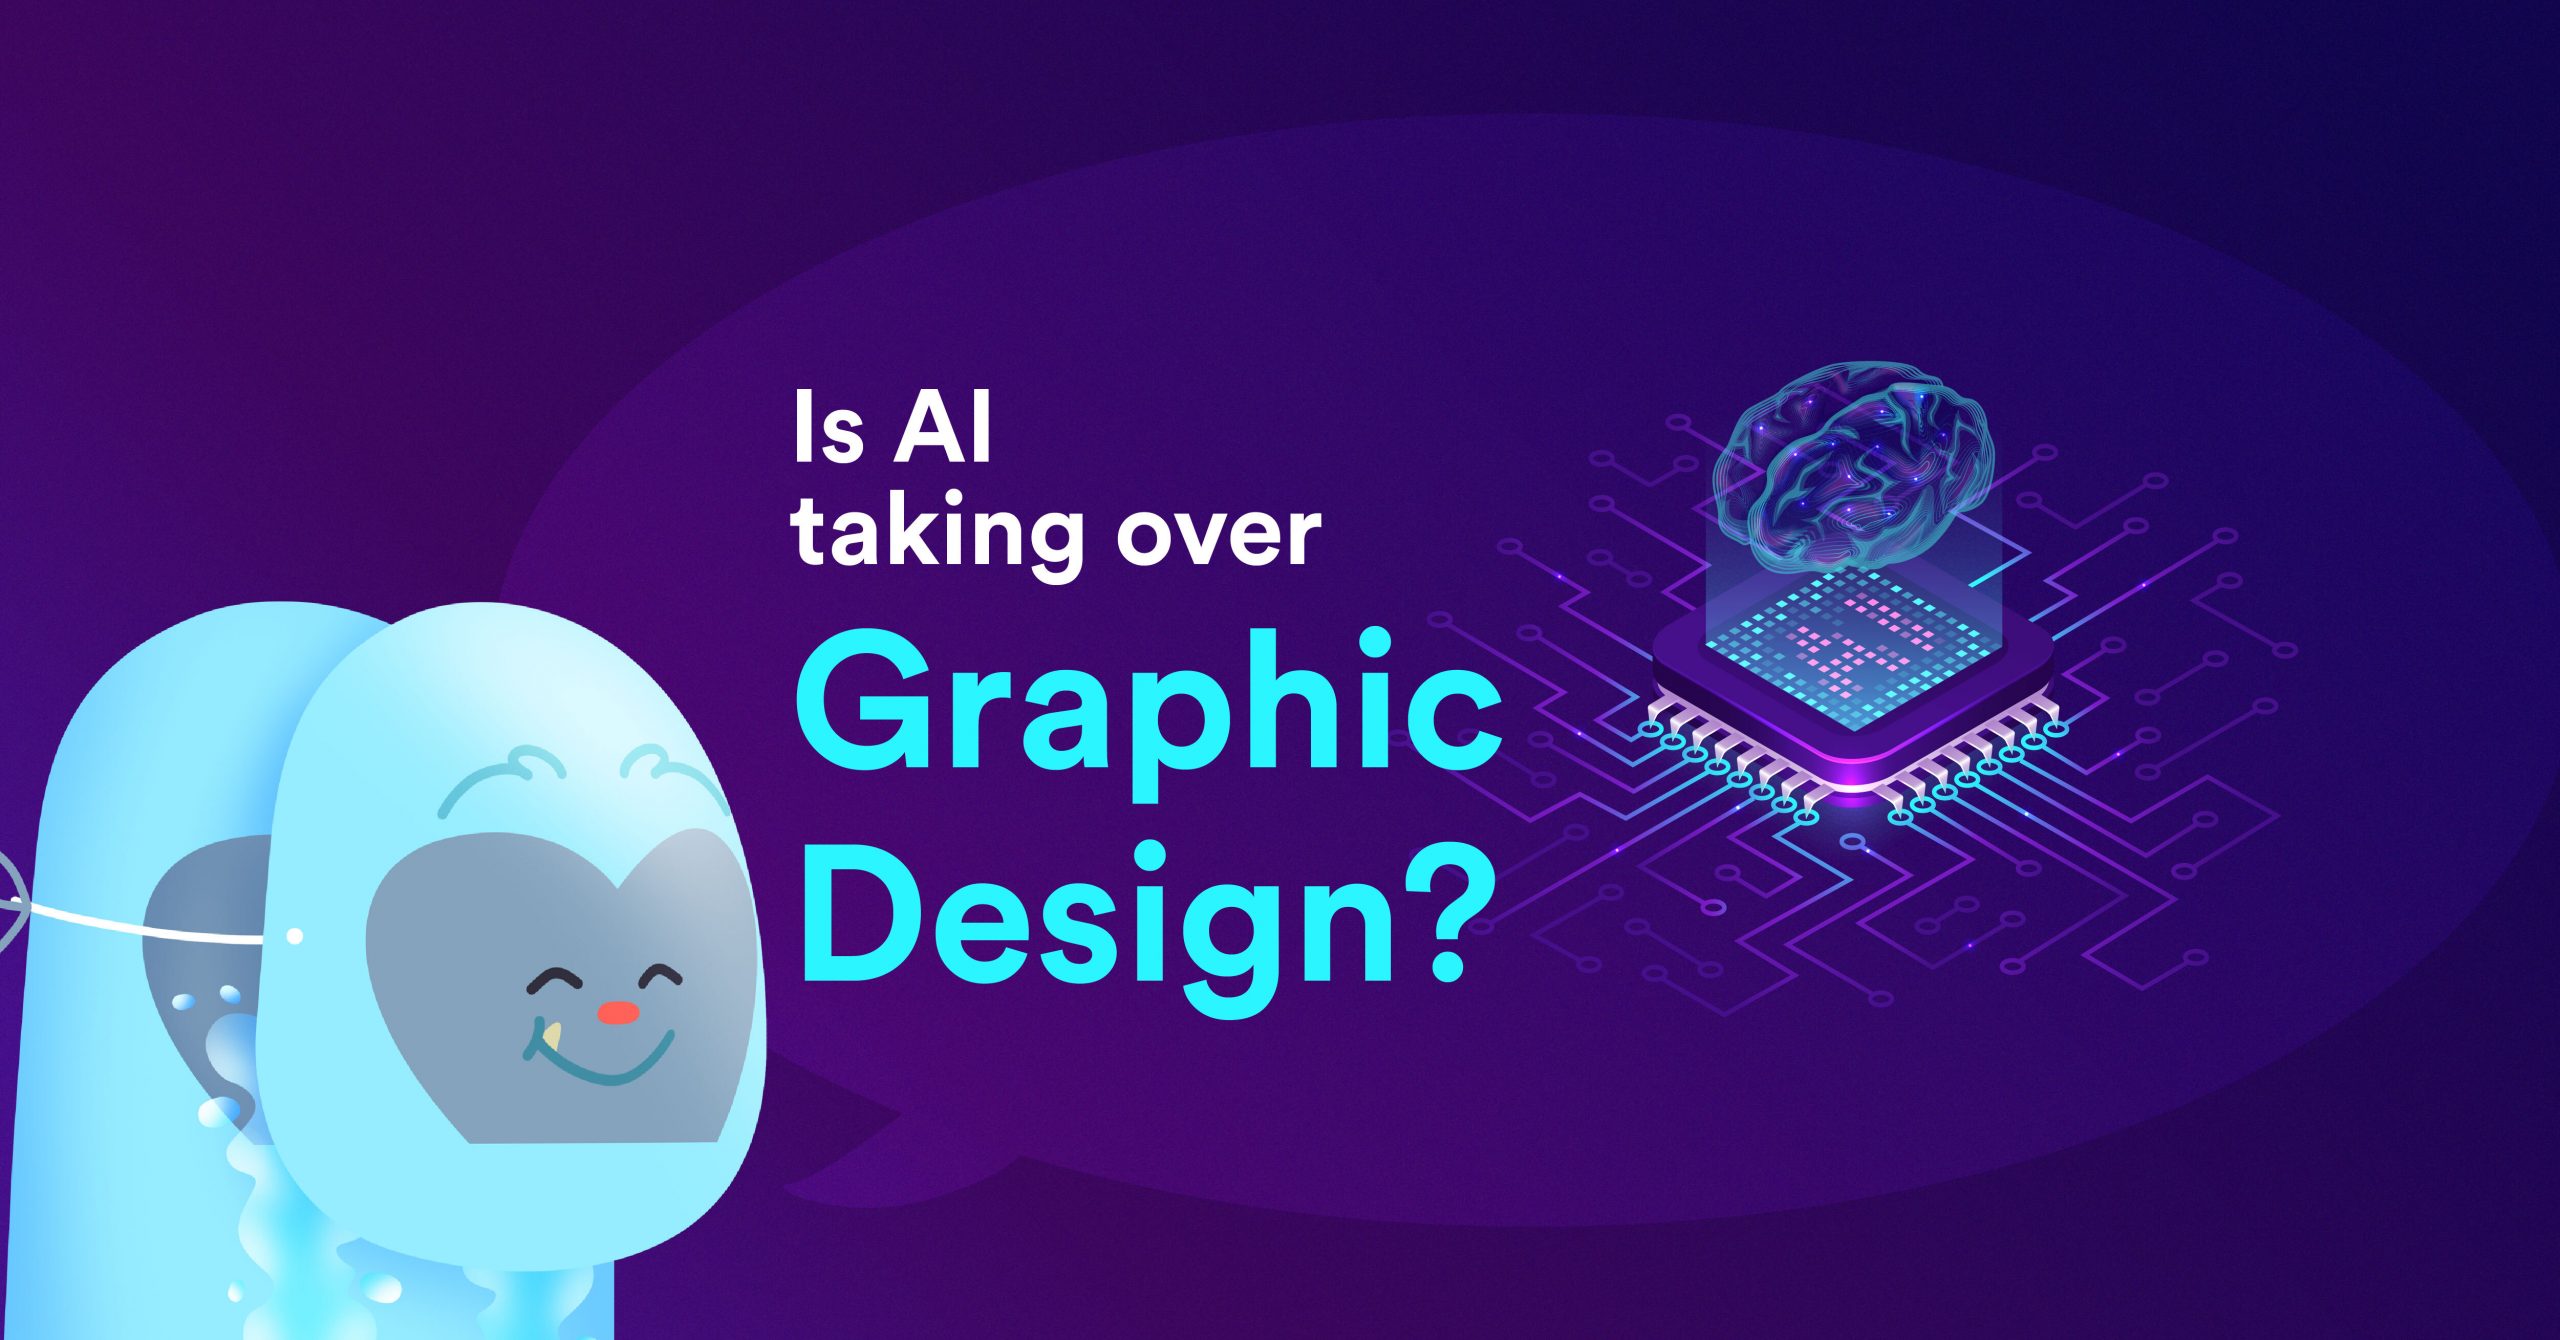 Is AI taking over Graphic Design?